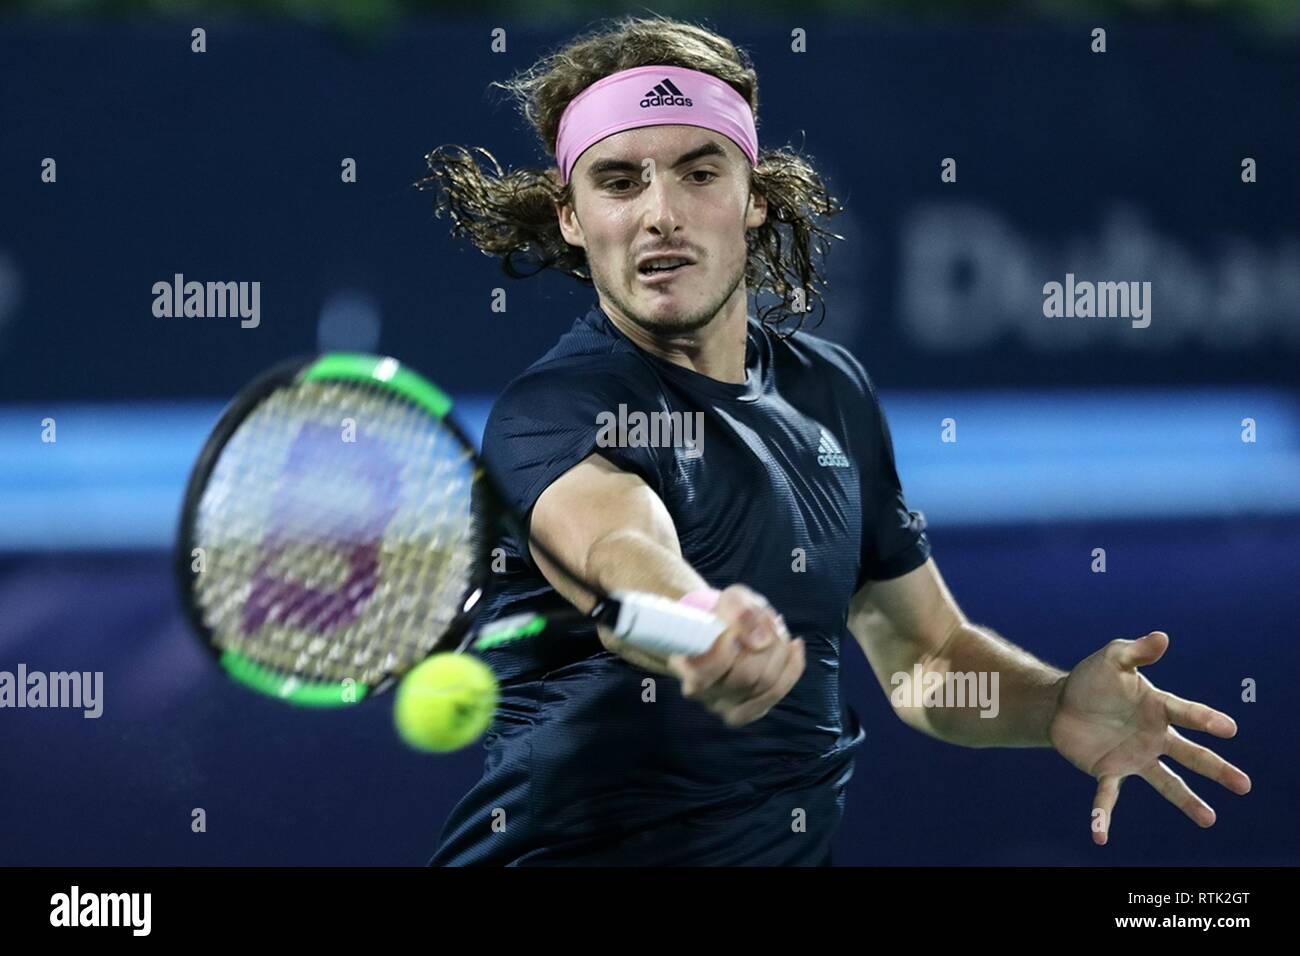 Dubai, United Arab Emirates. 1st Mar, 2019. Stefanos Tsitsipas of Greece  returns a shot during the singles semifinal match between Stefanos Tsitsipas  of Greece and Gael Monfils of France at the ATP